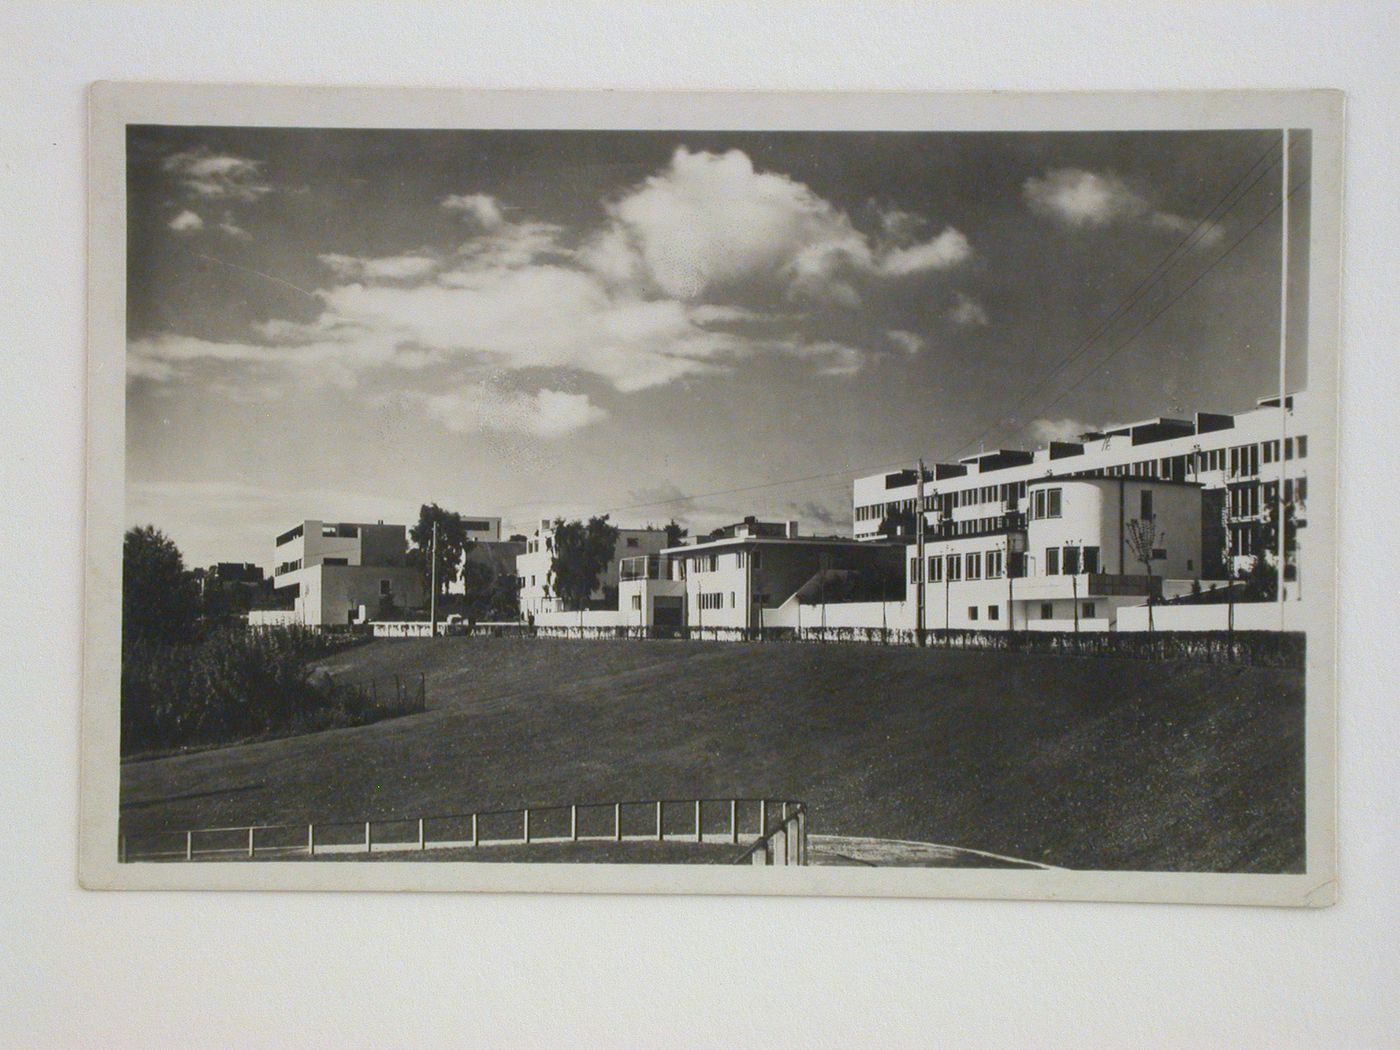 General view of Weissenhofsiedlung showing Houses 14, 15, 18, 20, 22 and 24, with Houses 1, 2, 3 and 4 in the background, Stuttgart, Germany